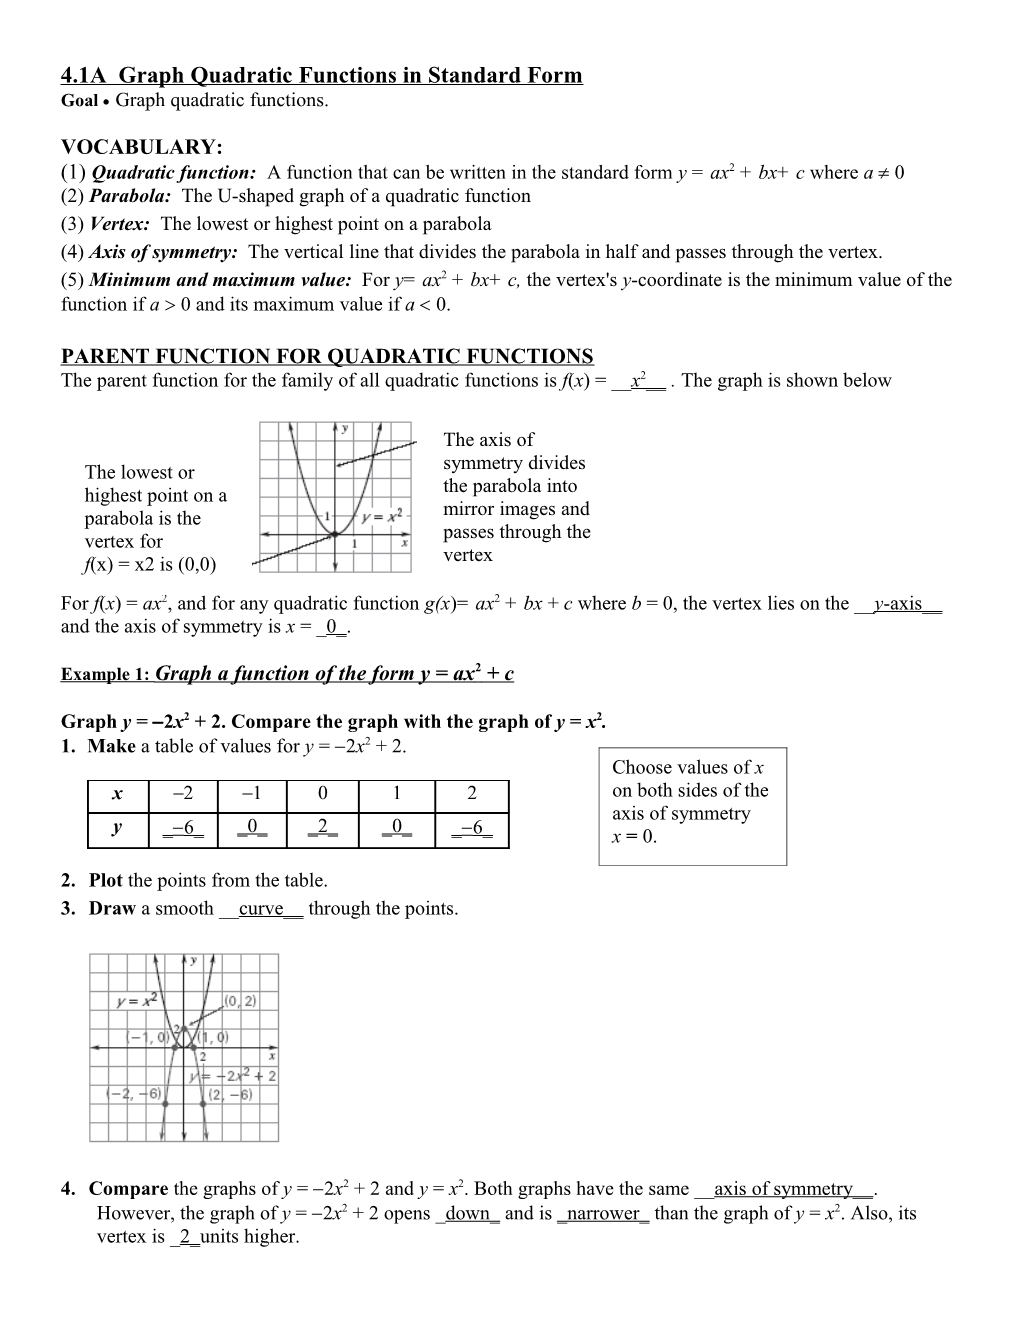 4.1A Graph Quadratic Functions in Standard Form